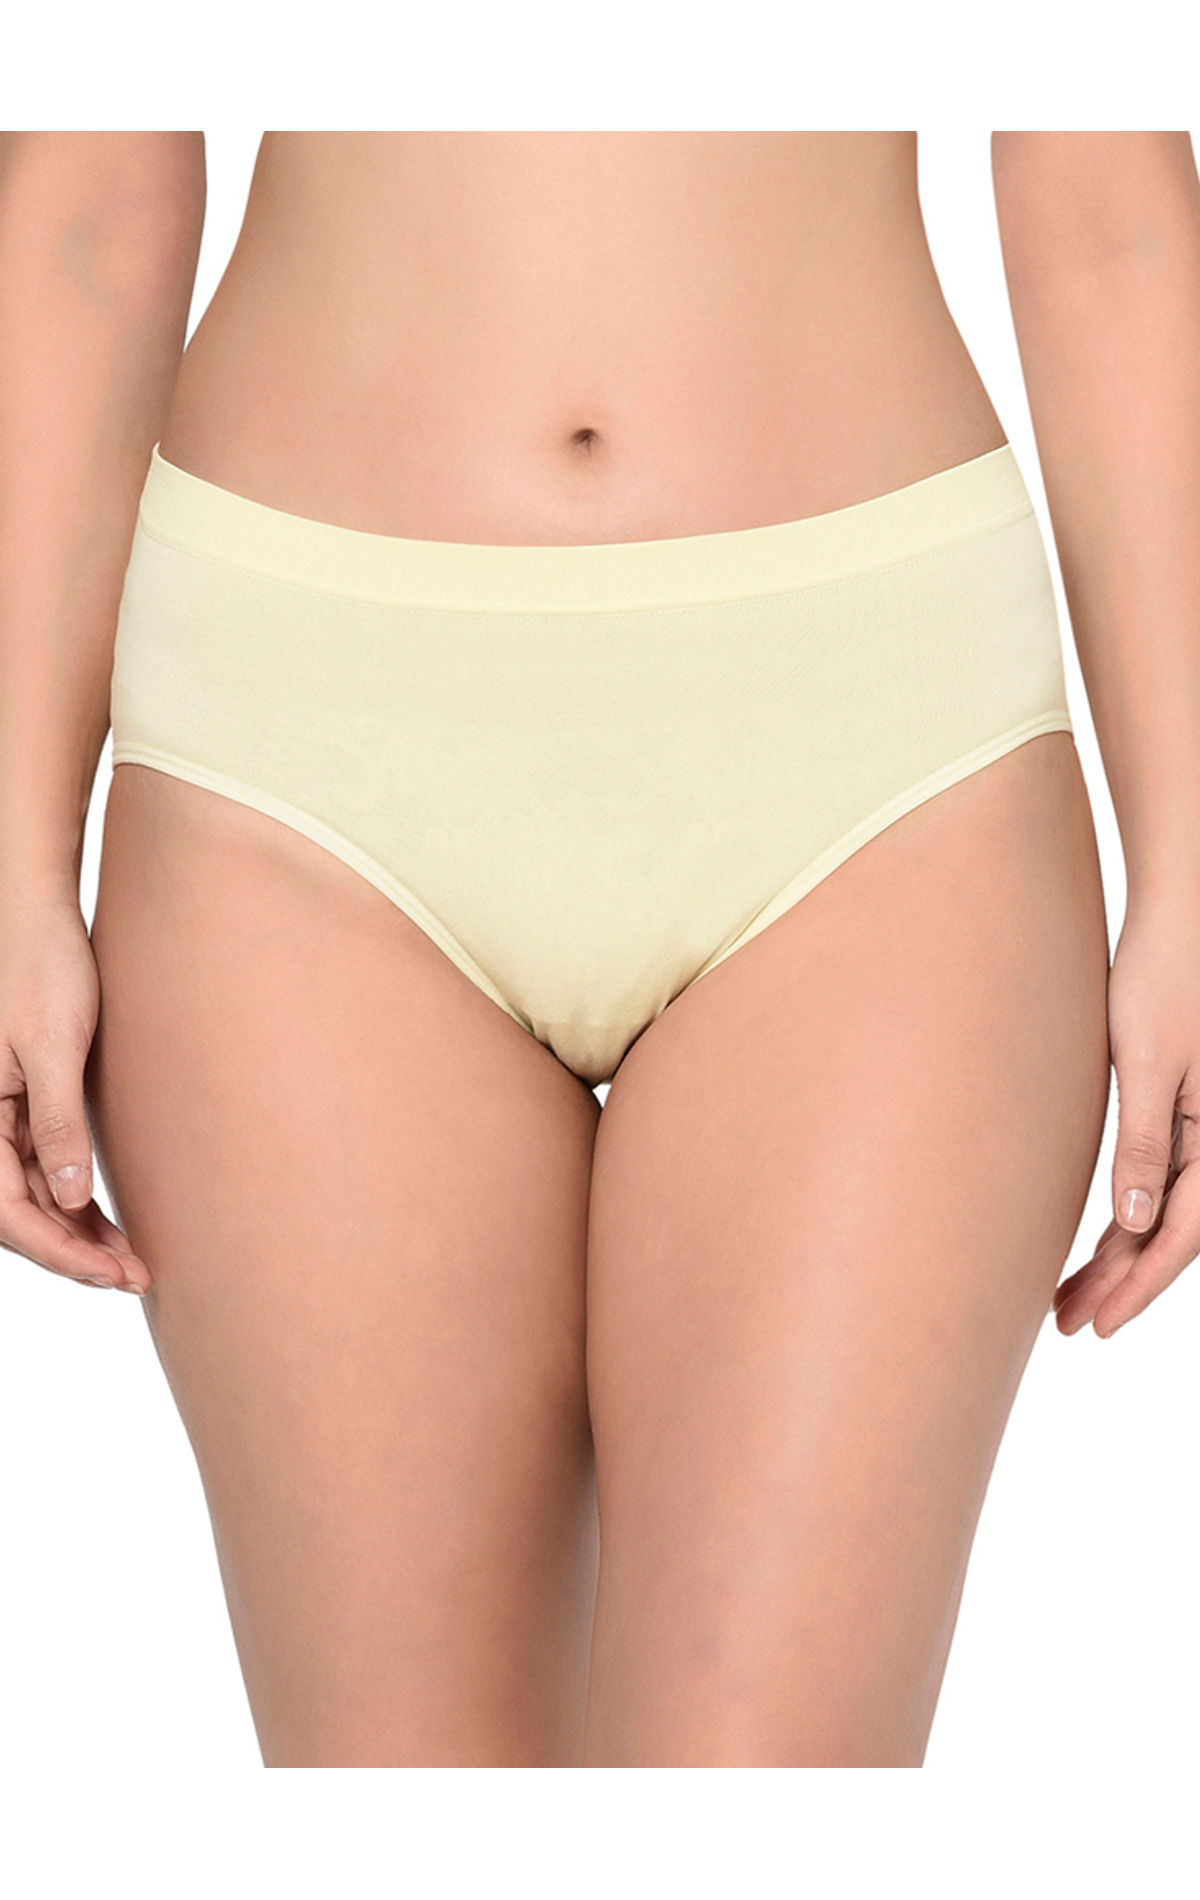 Bodycare Panties For Womens - Get Best Price from Manufacturers & Suppliers  in India